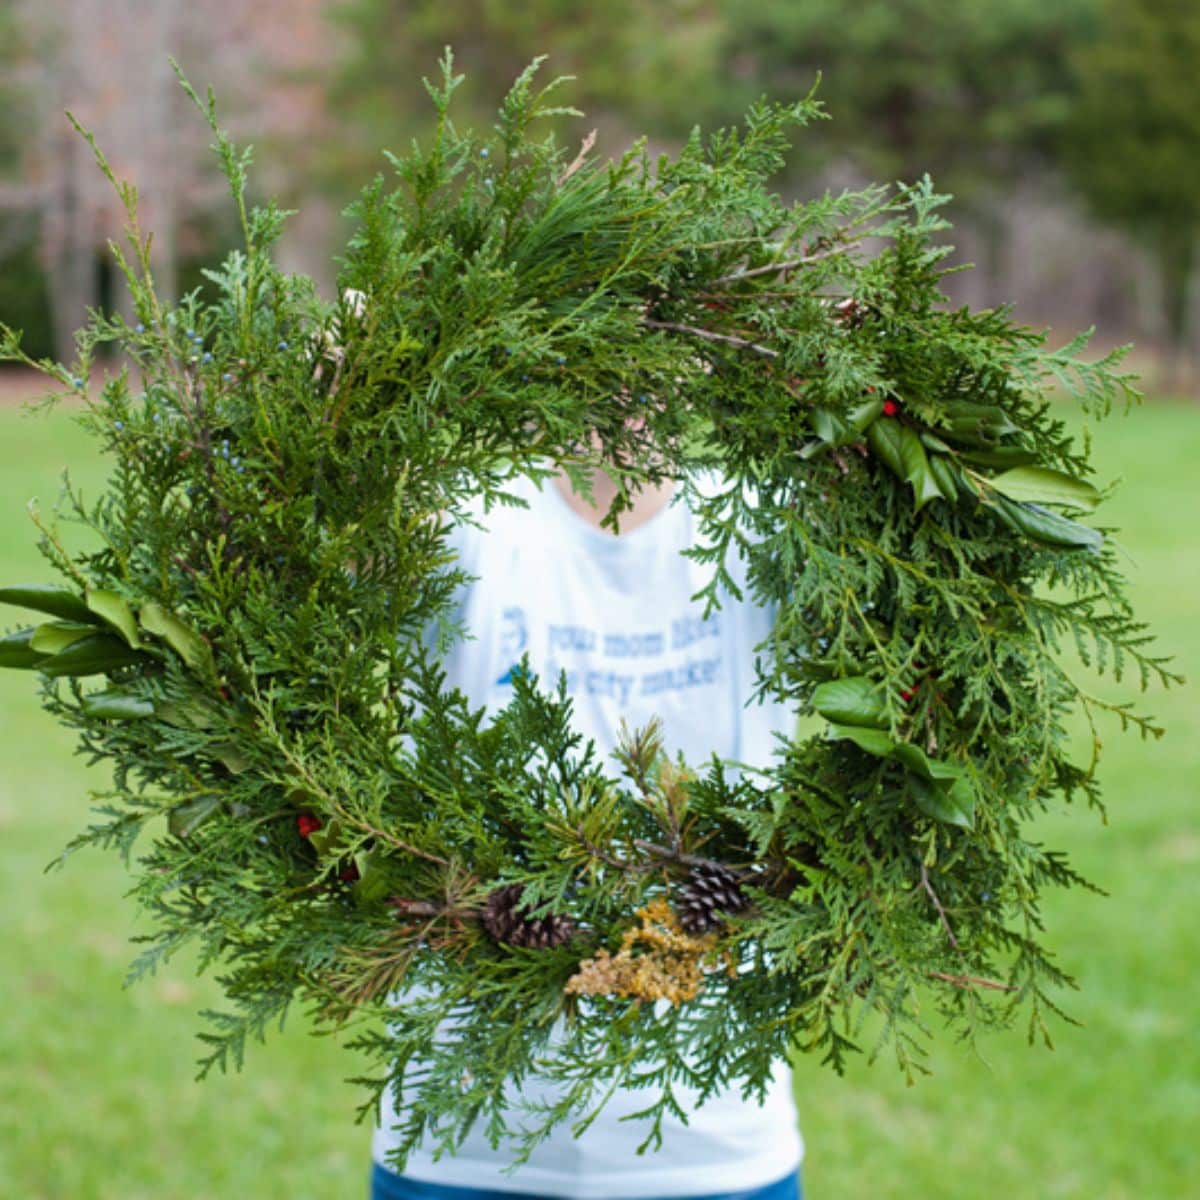 Evergreen Wreath with woman holding it up standing outdoors